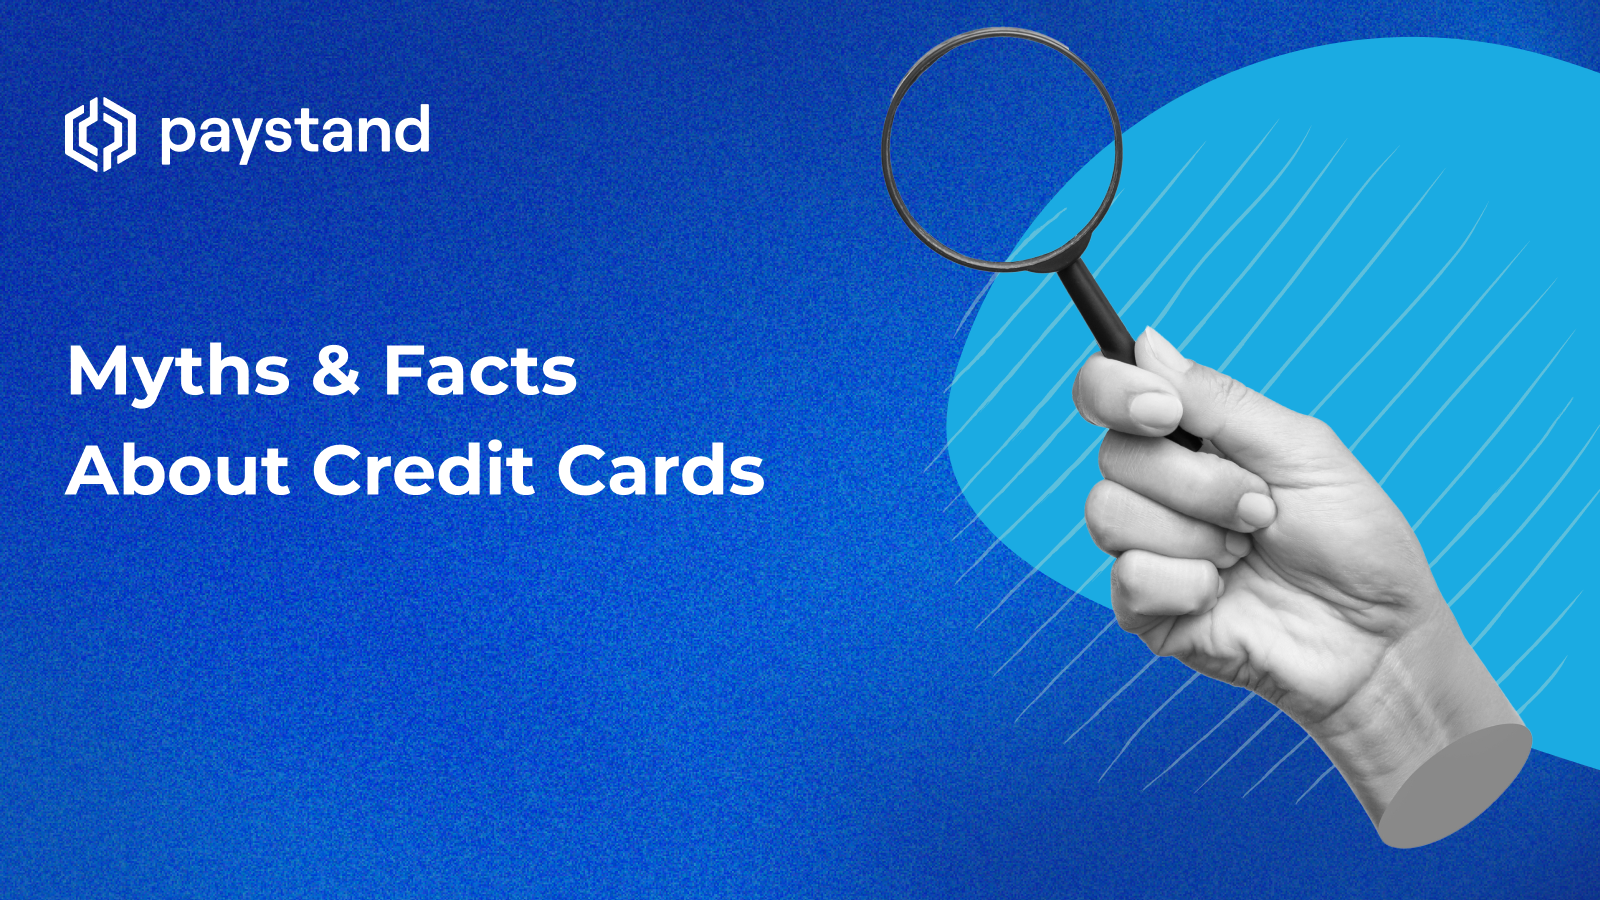 Myths & Facts About Credit Cards